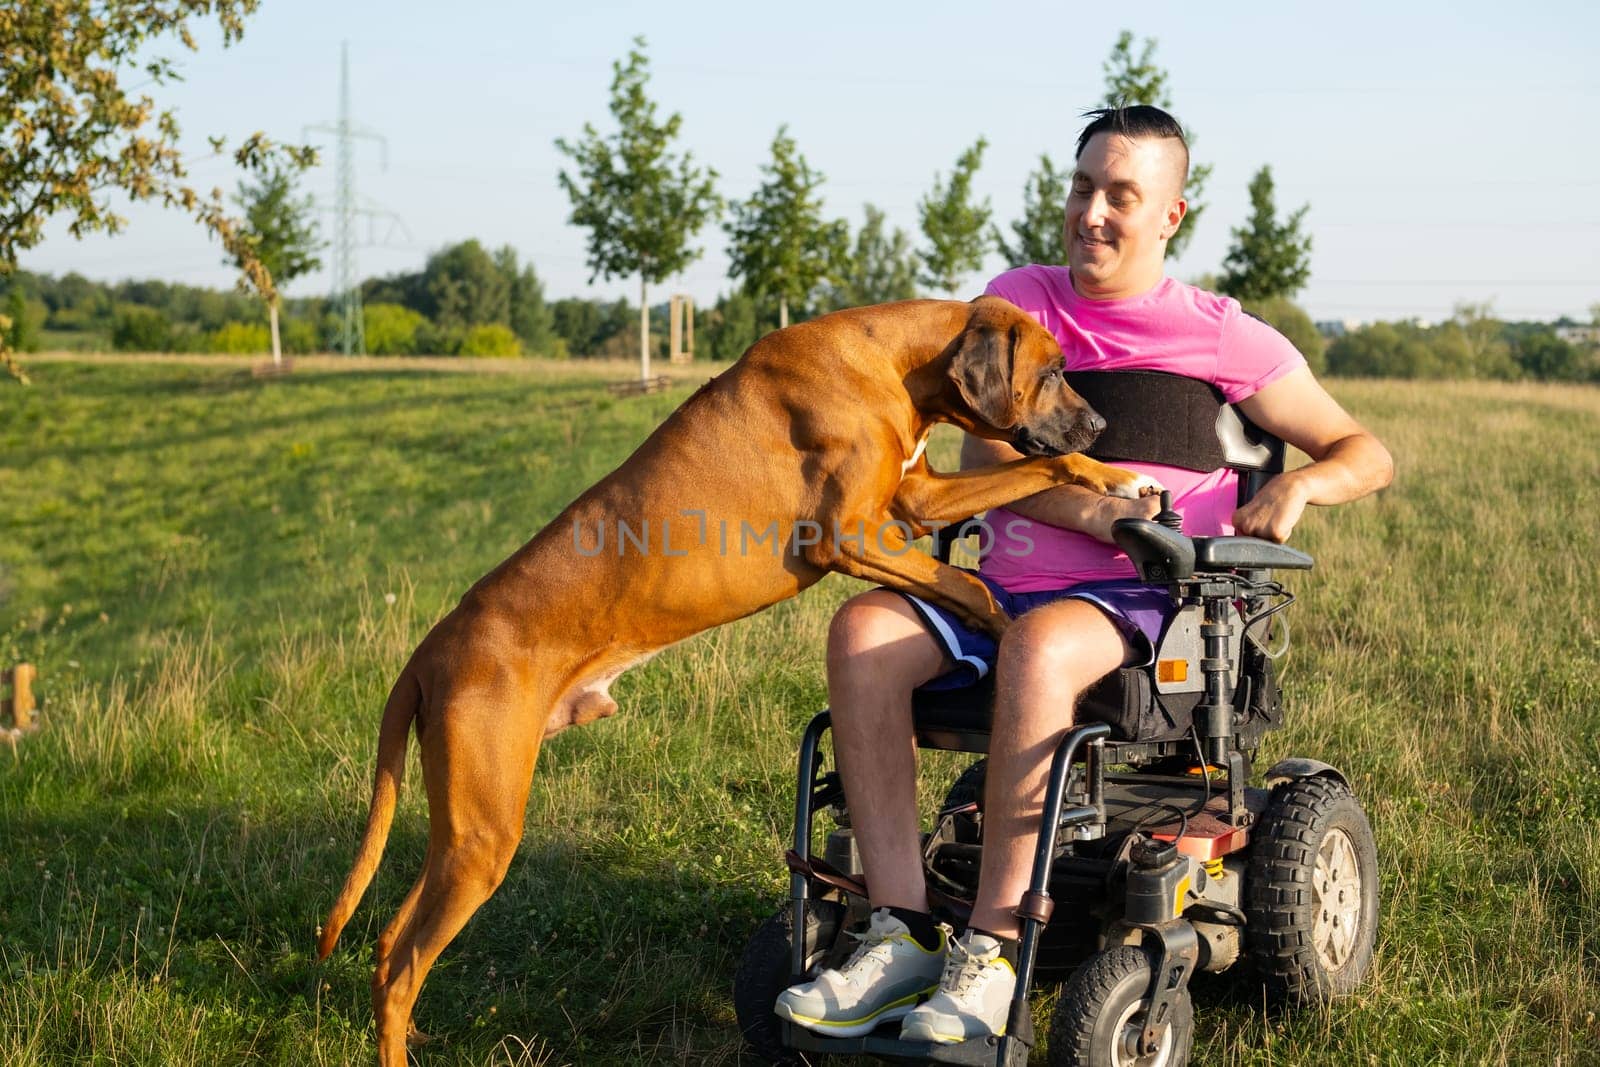 A young man using a wheelchair enjoying playtime with his dog at the park